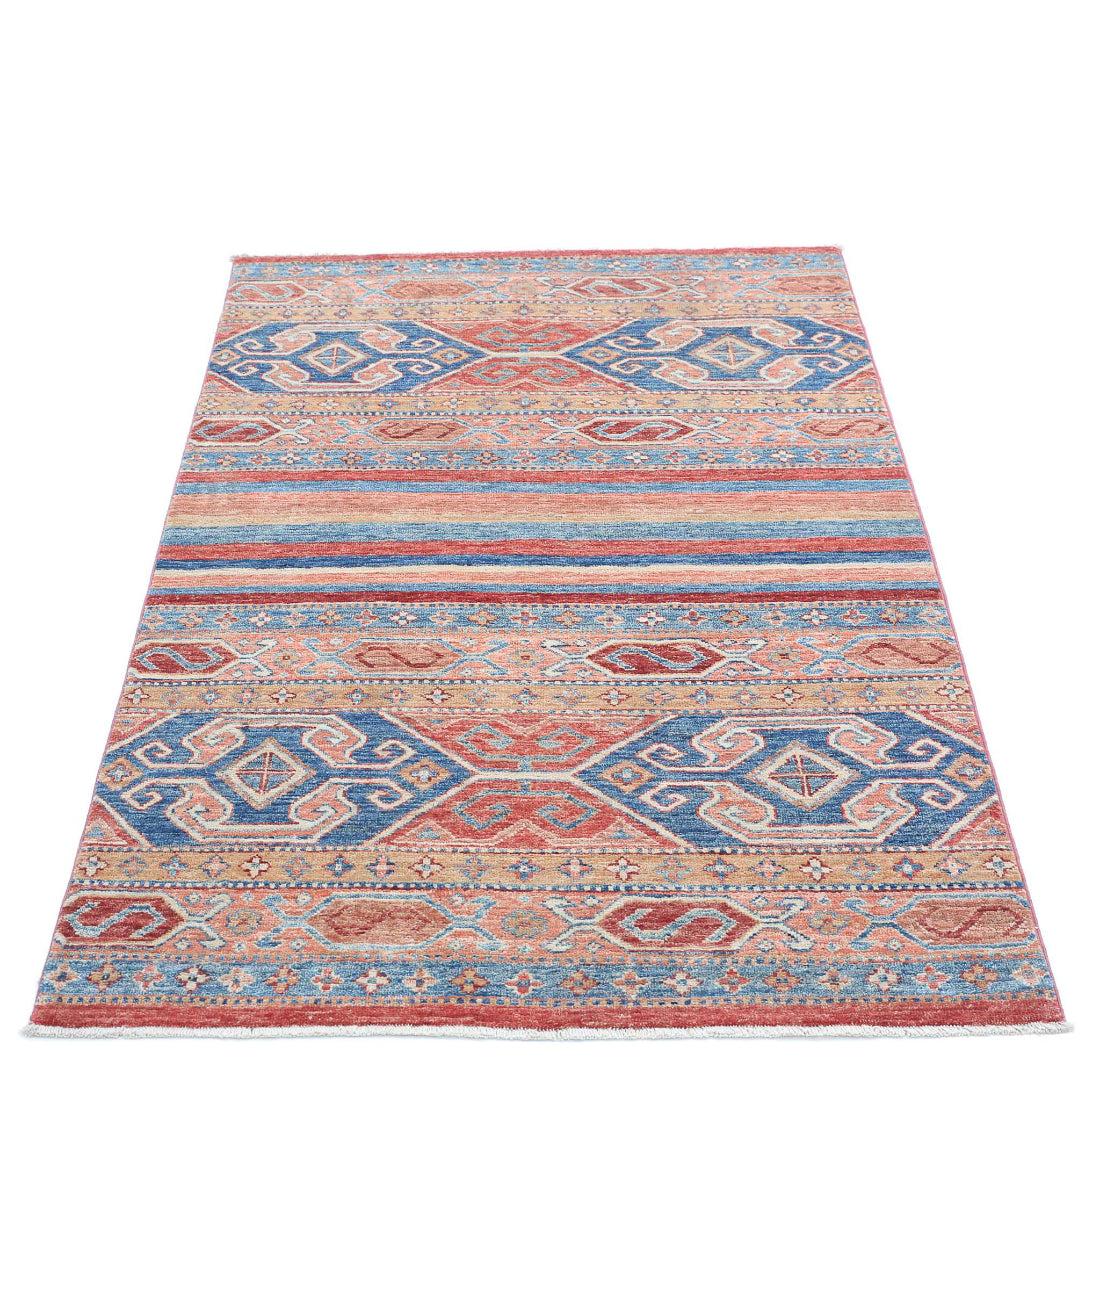 Hand Knotted Khurjeen Wool Rug - 3'2'' x 4'11'' 3'2'' x 4'11'' (95 X 148) / Multi / Multi